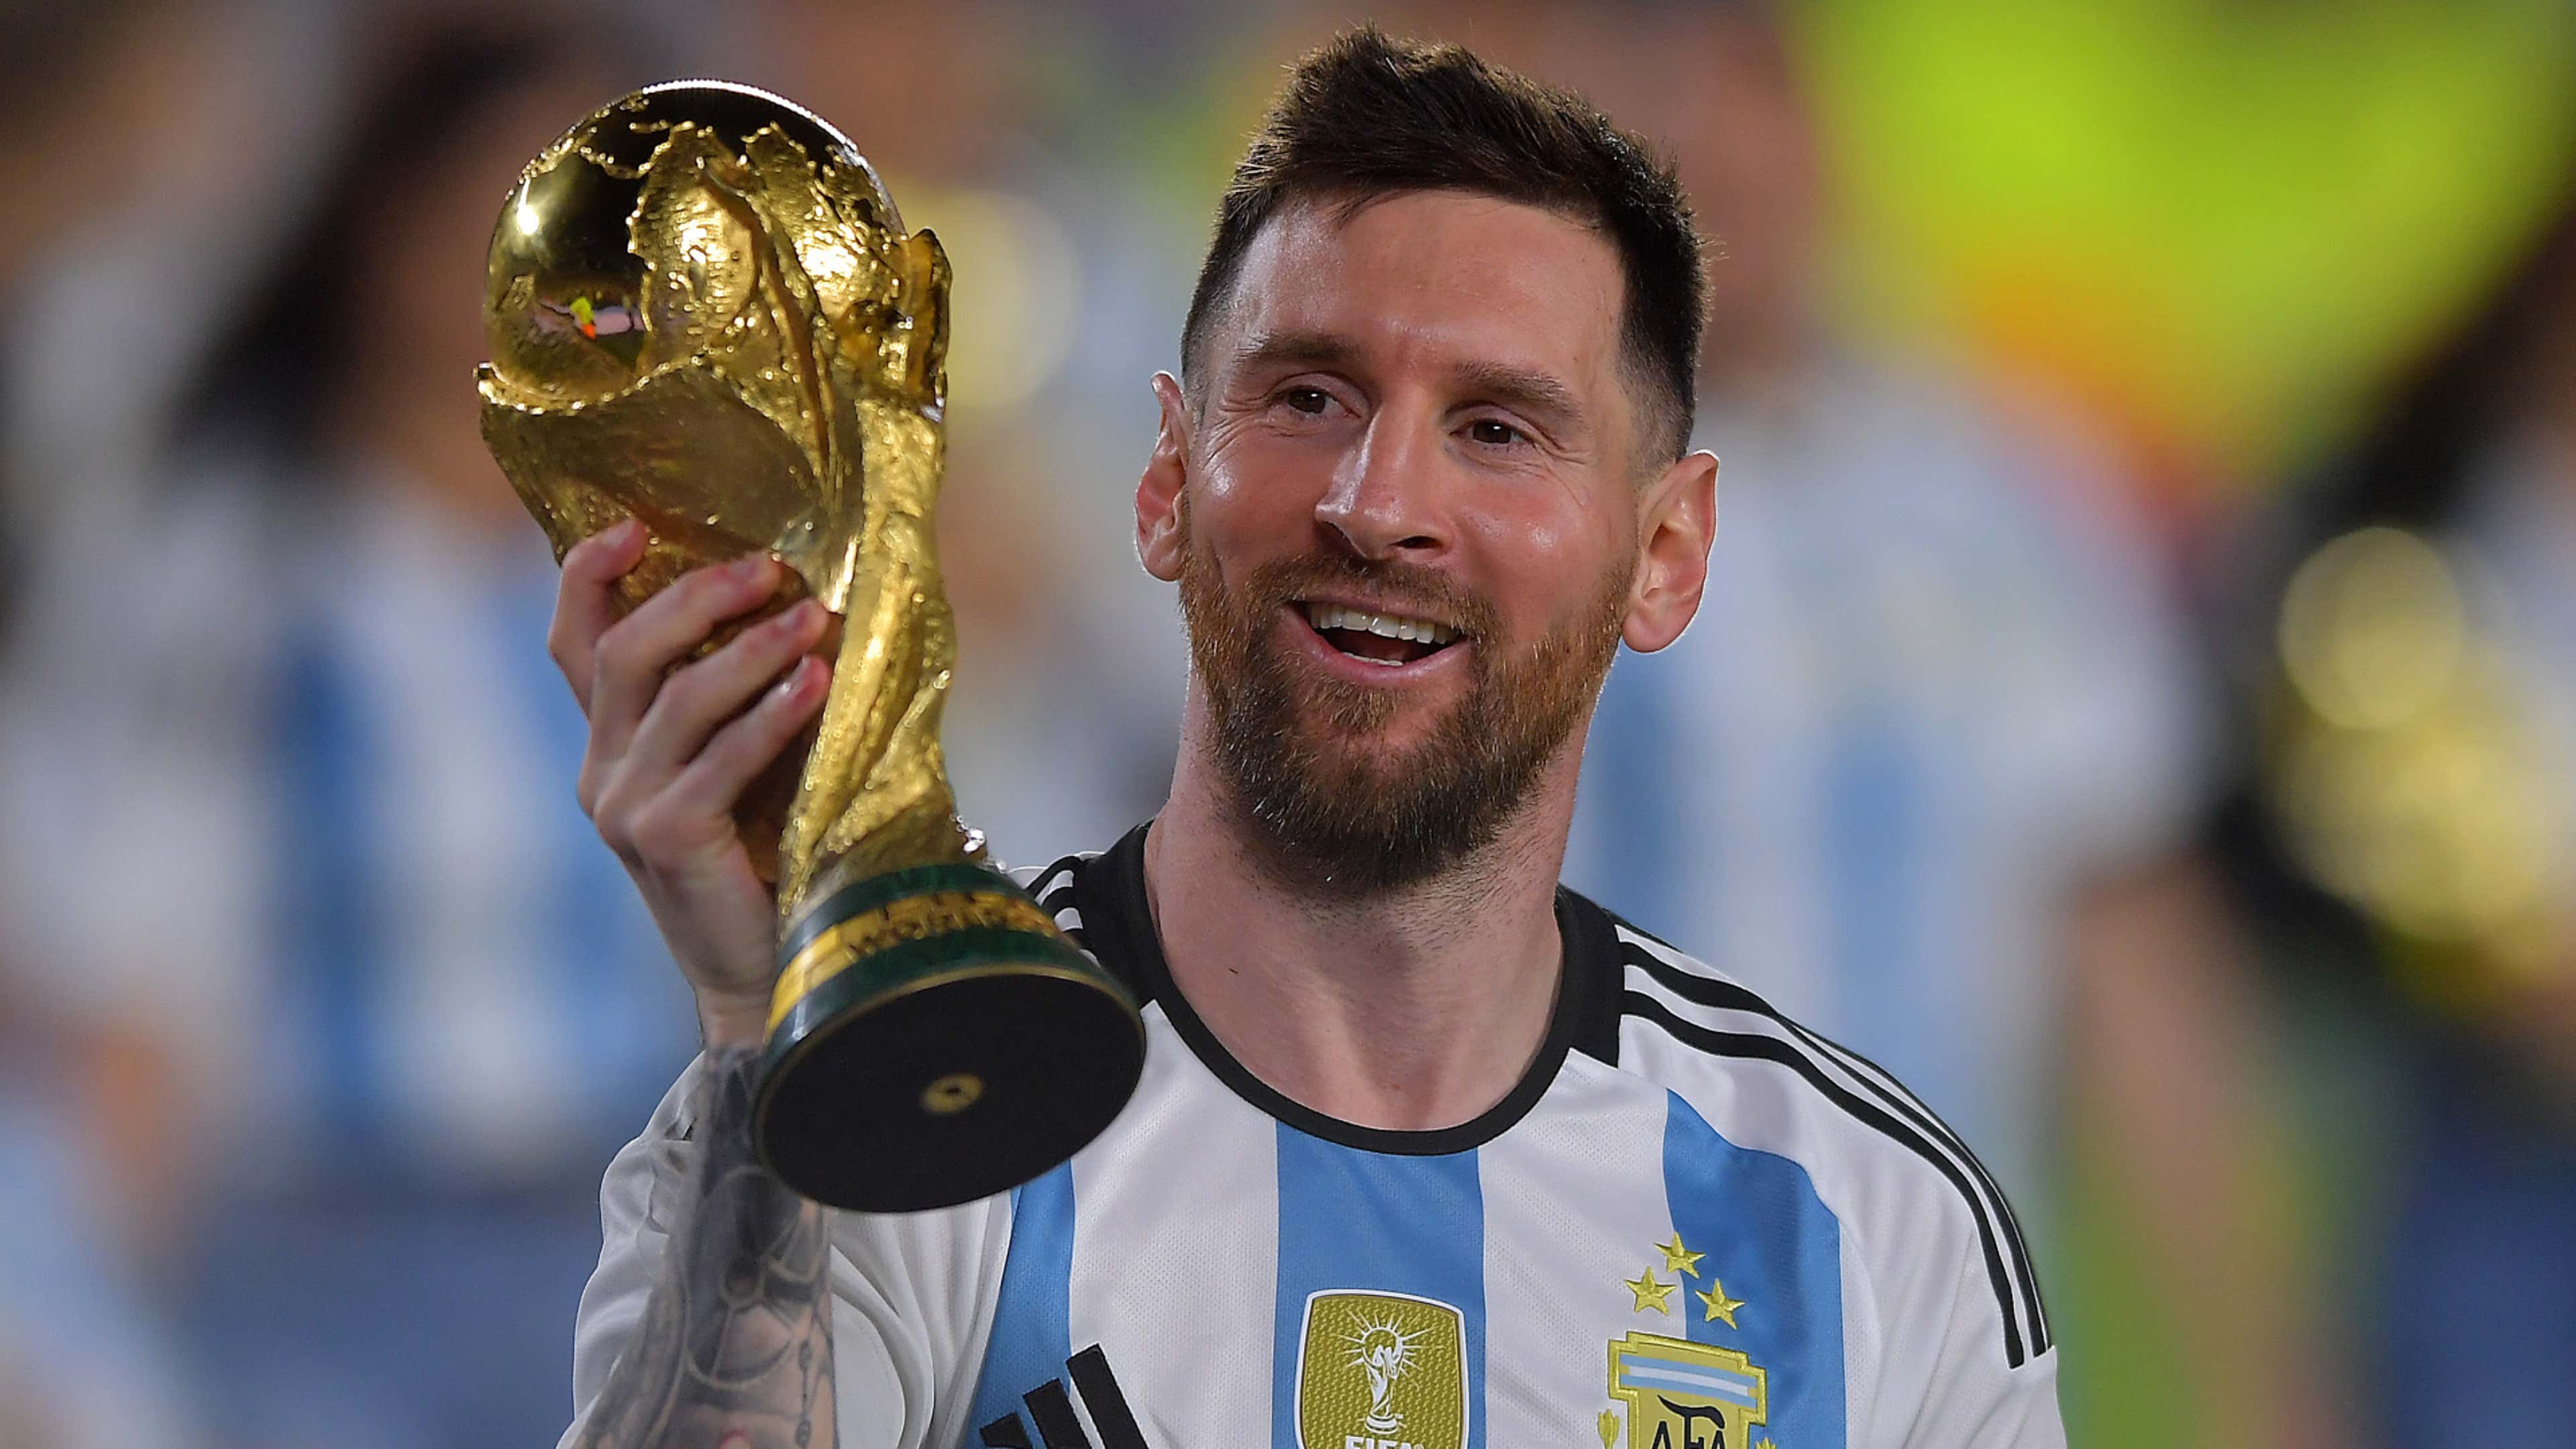 messi world cup jersey 3 stars